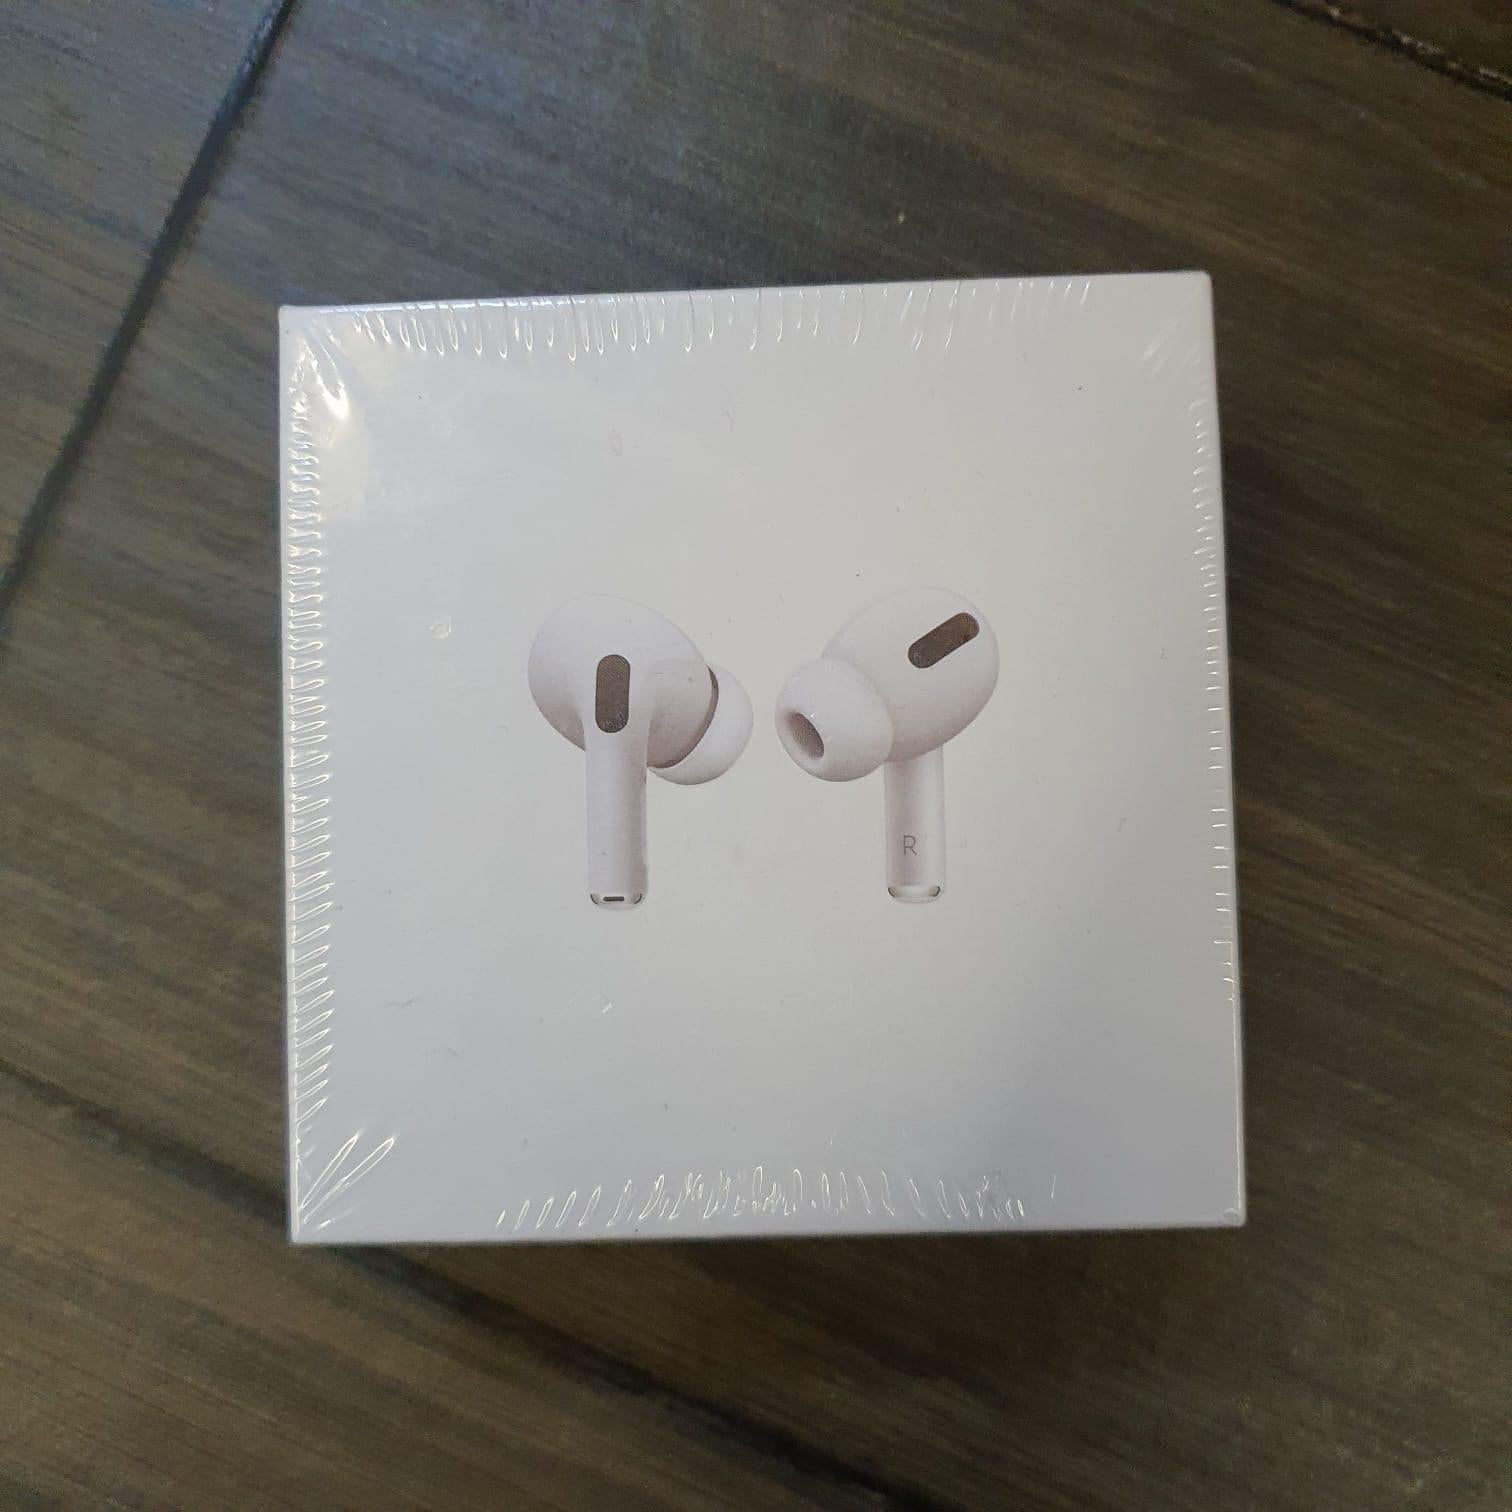 AirPods Pro (2nd generation) USA Best Quality Earbuds with MagSafe Charging Box